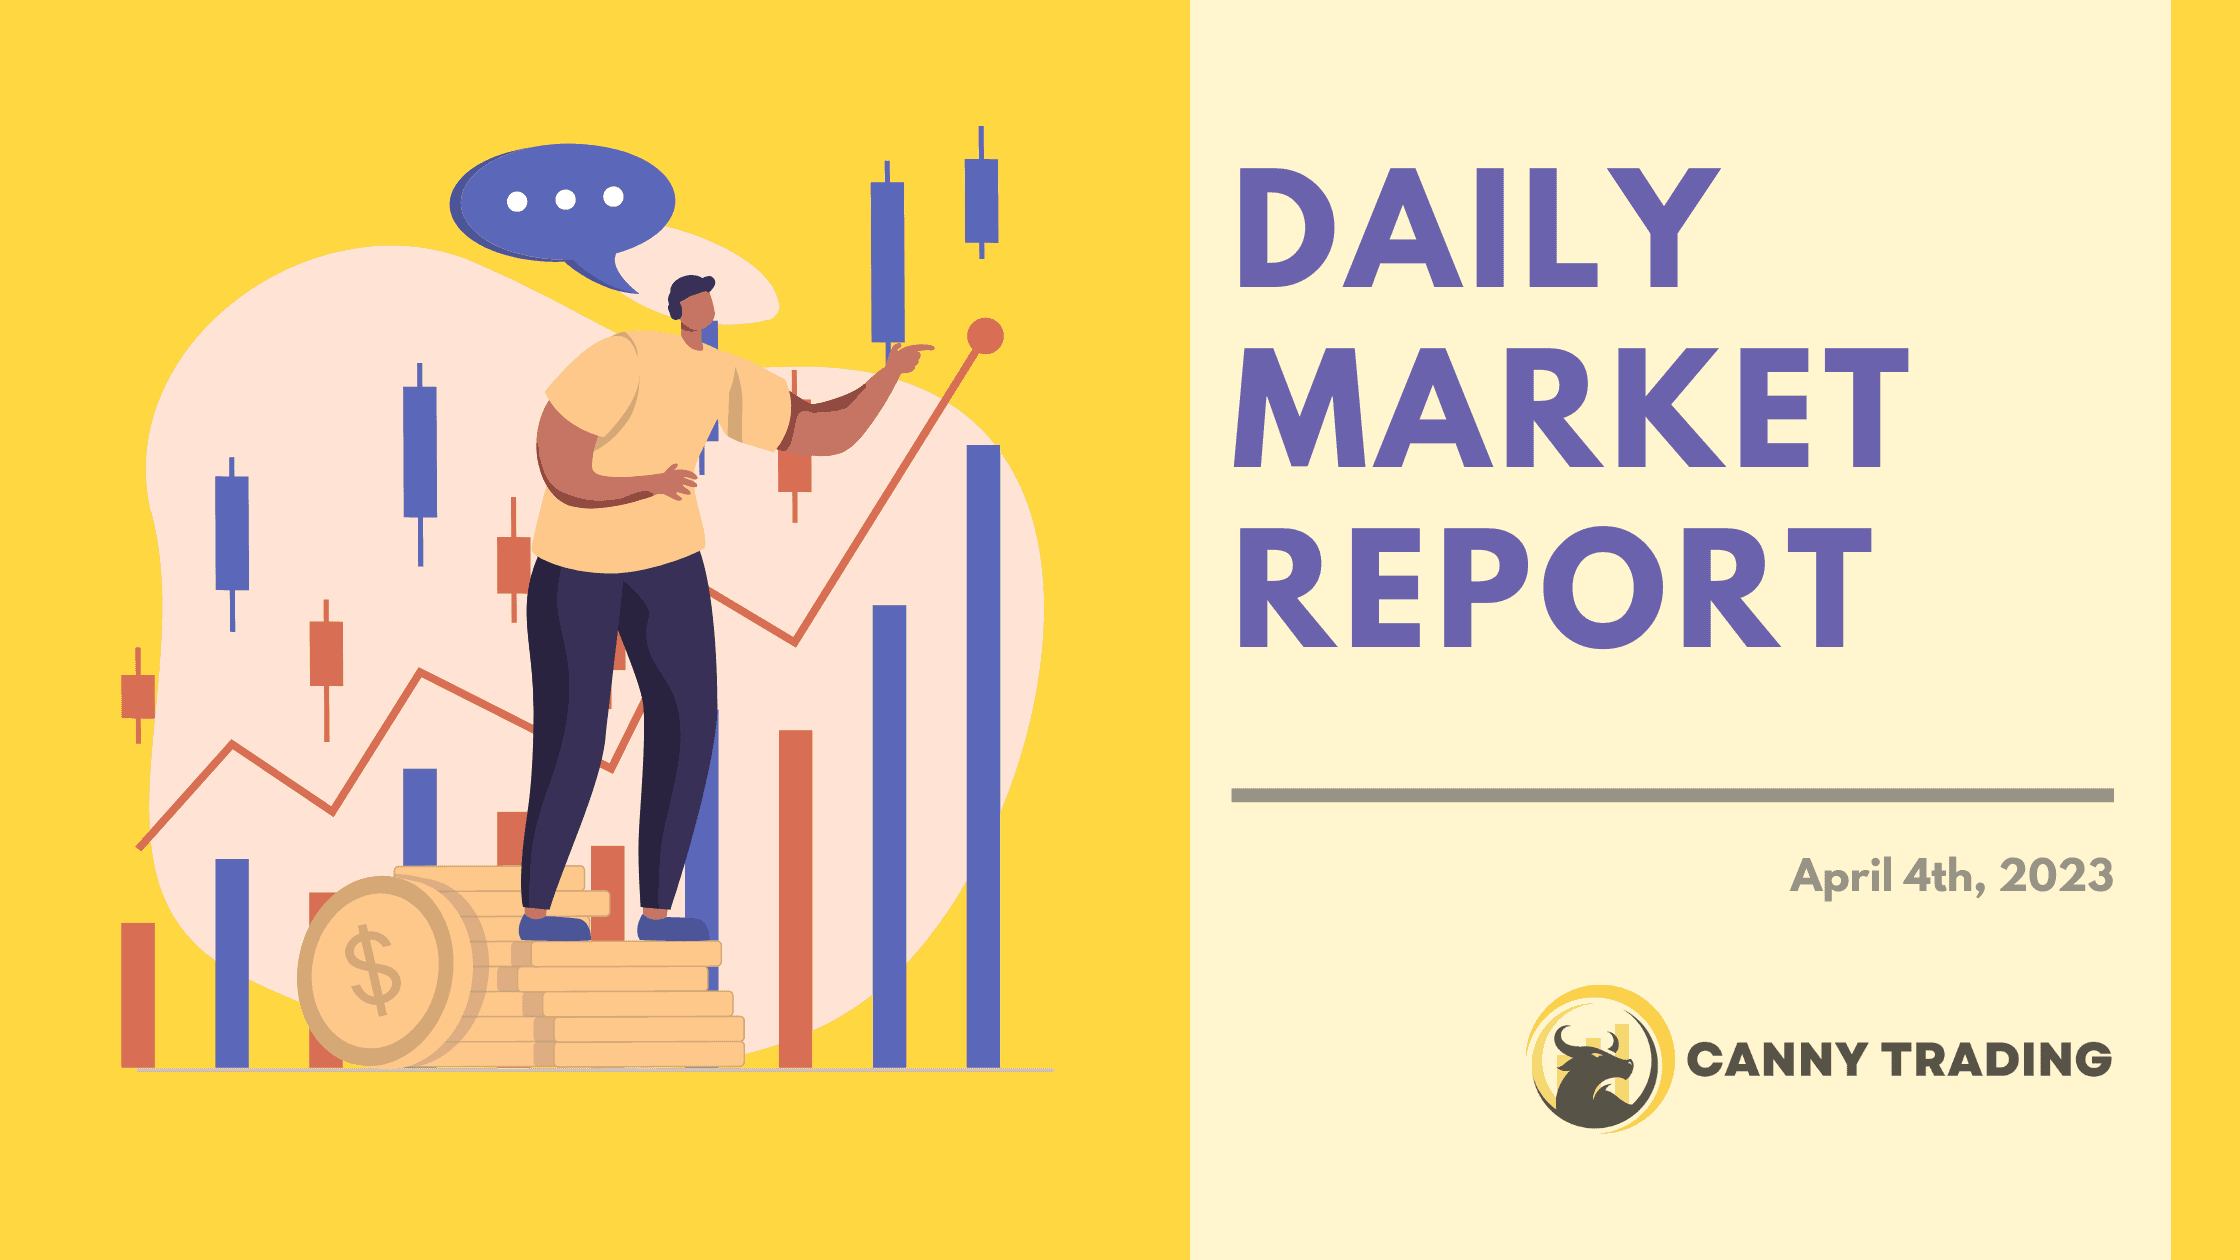 Daily Market Report April 4, 2023